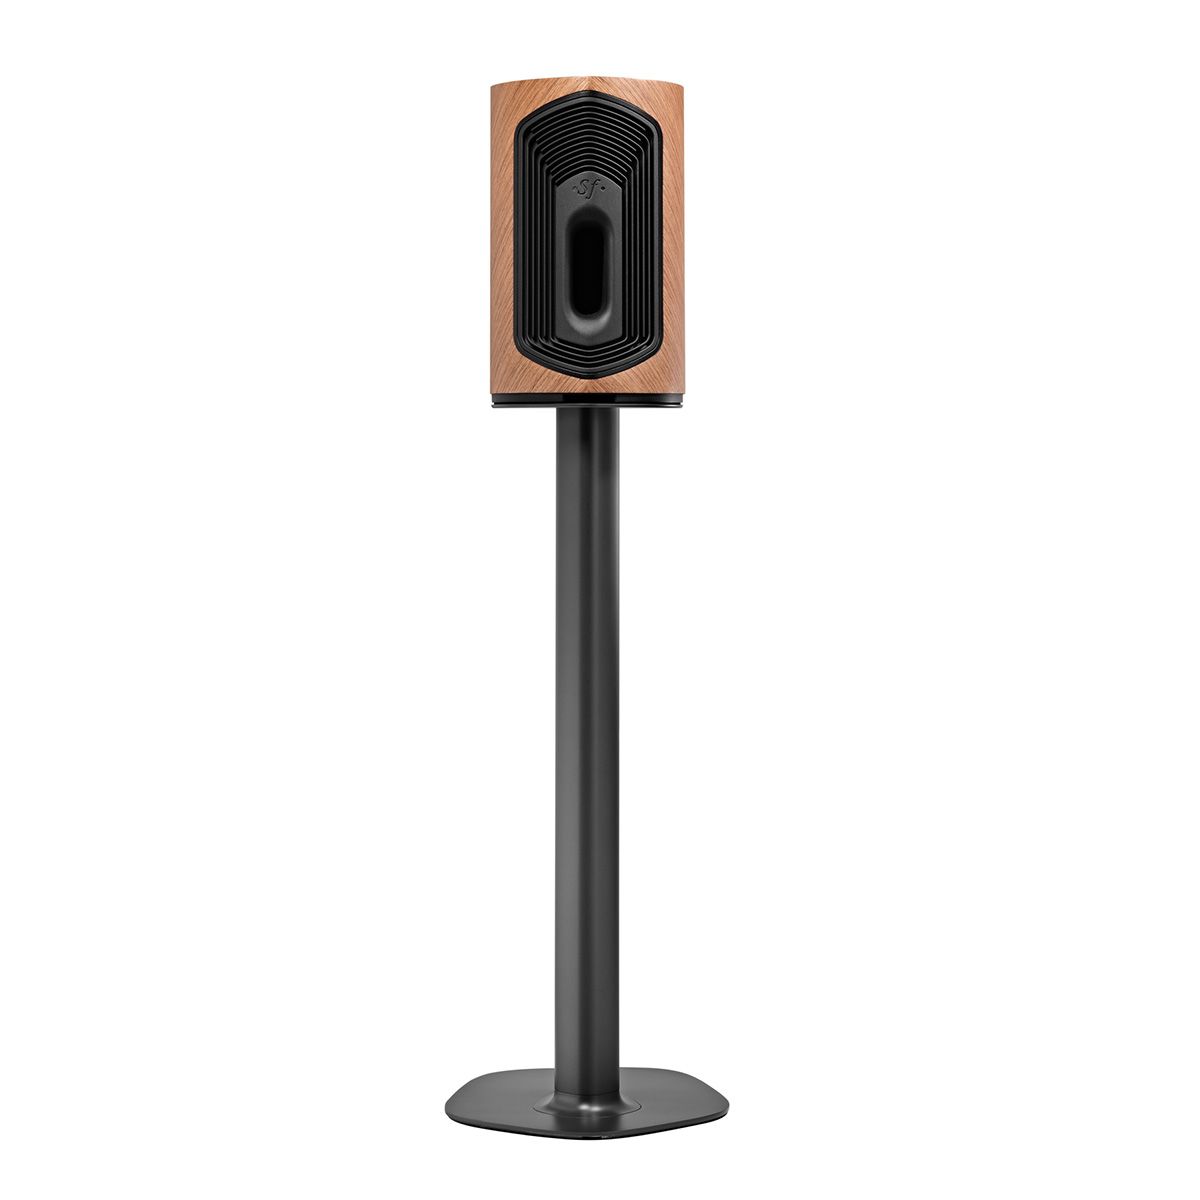 Sonus Faber Duetto Wireless Speaker System rear view on stand